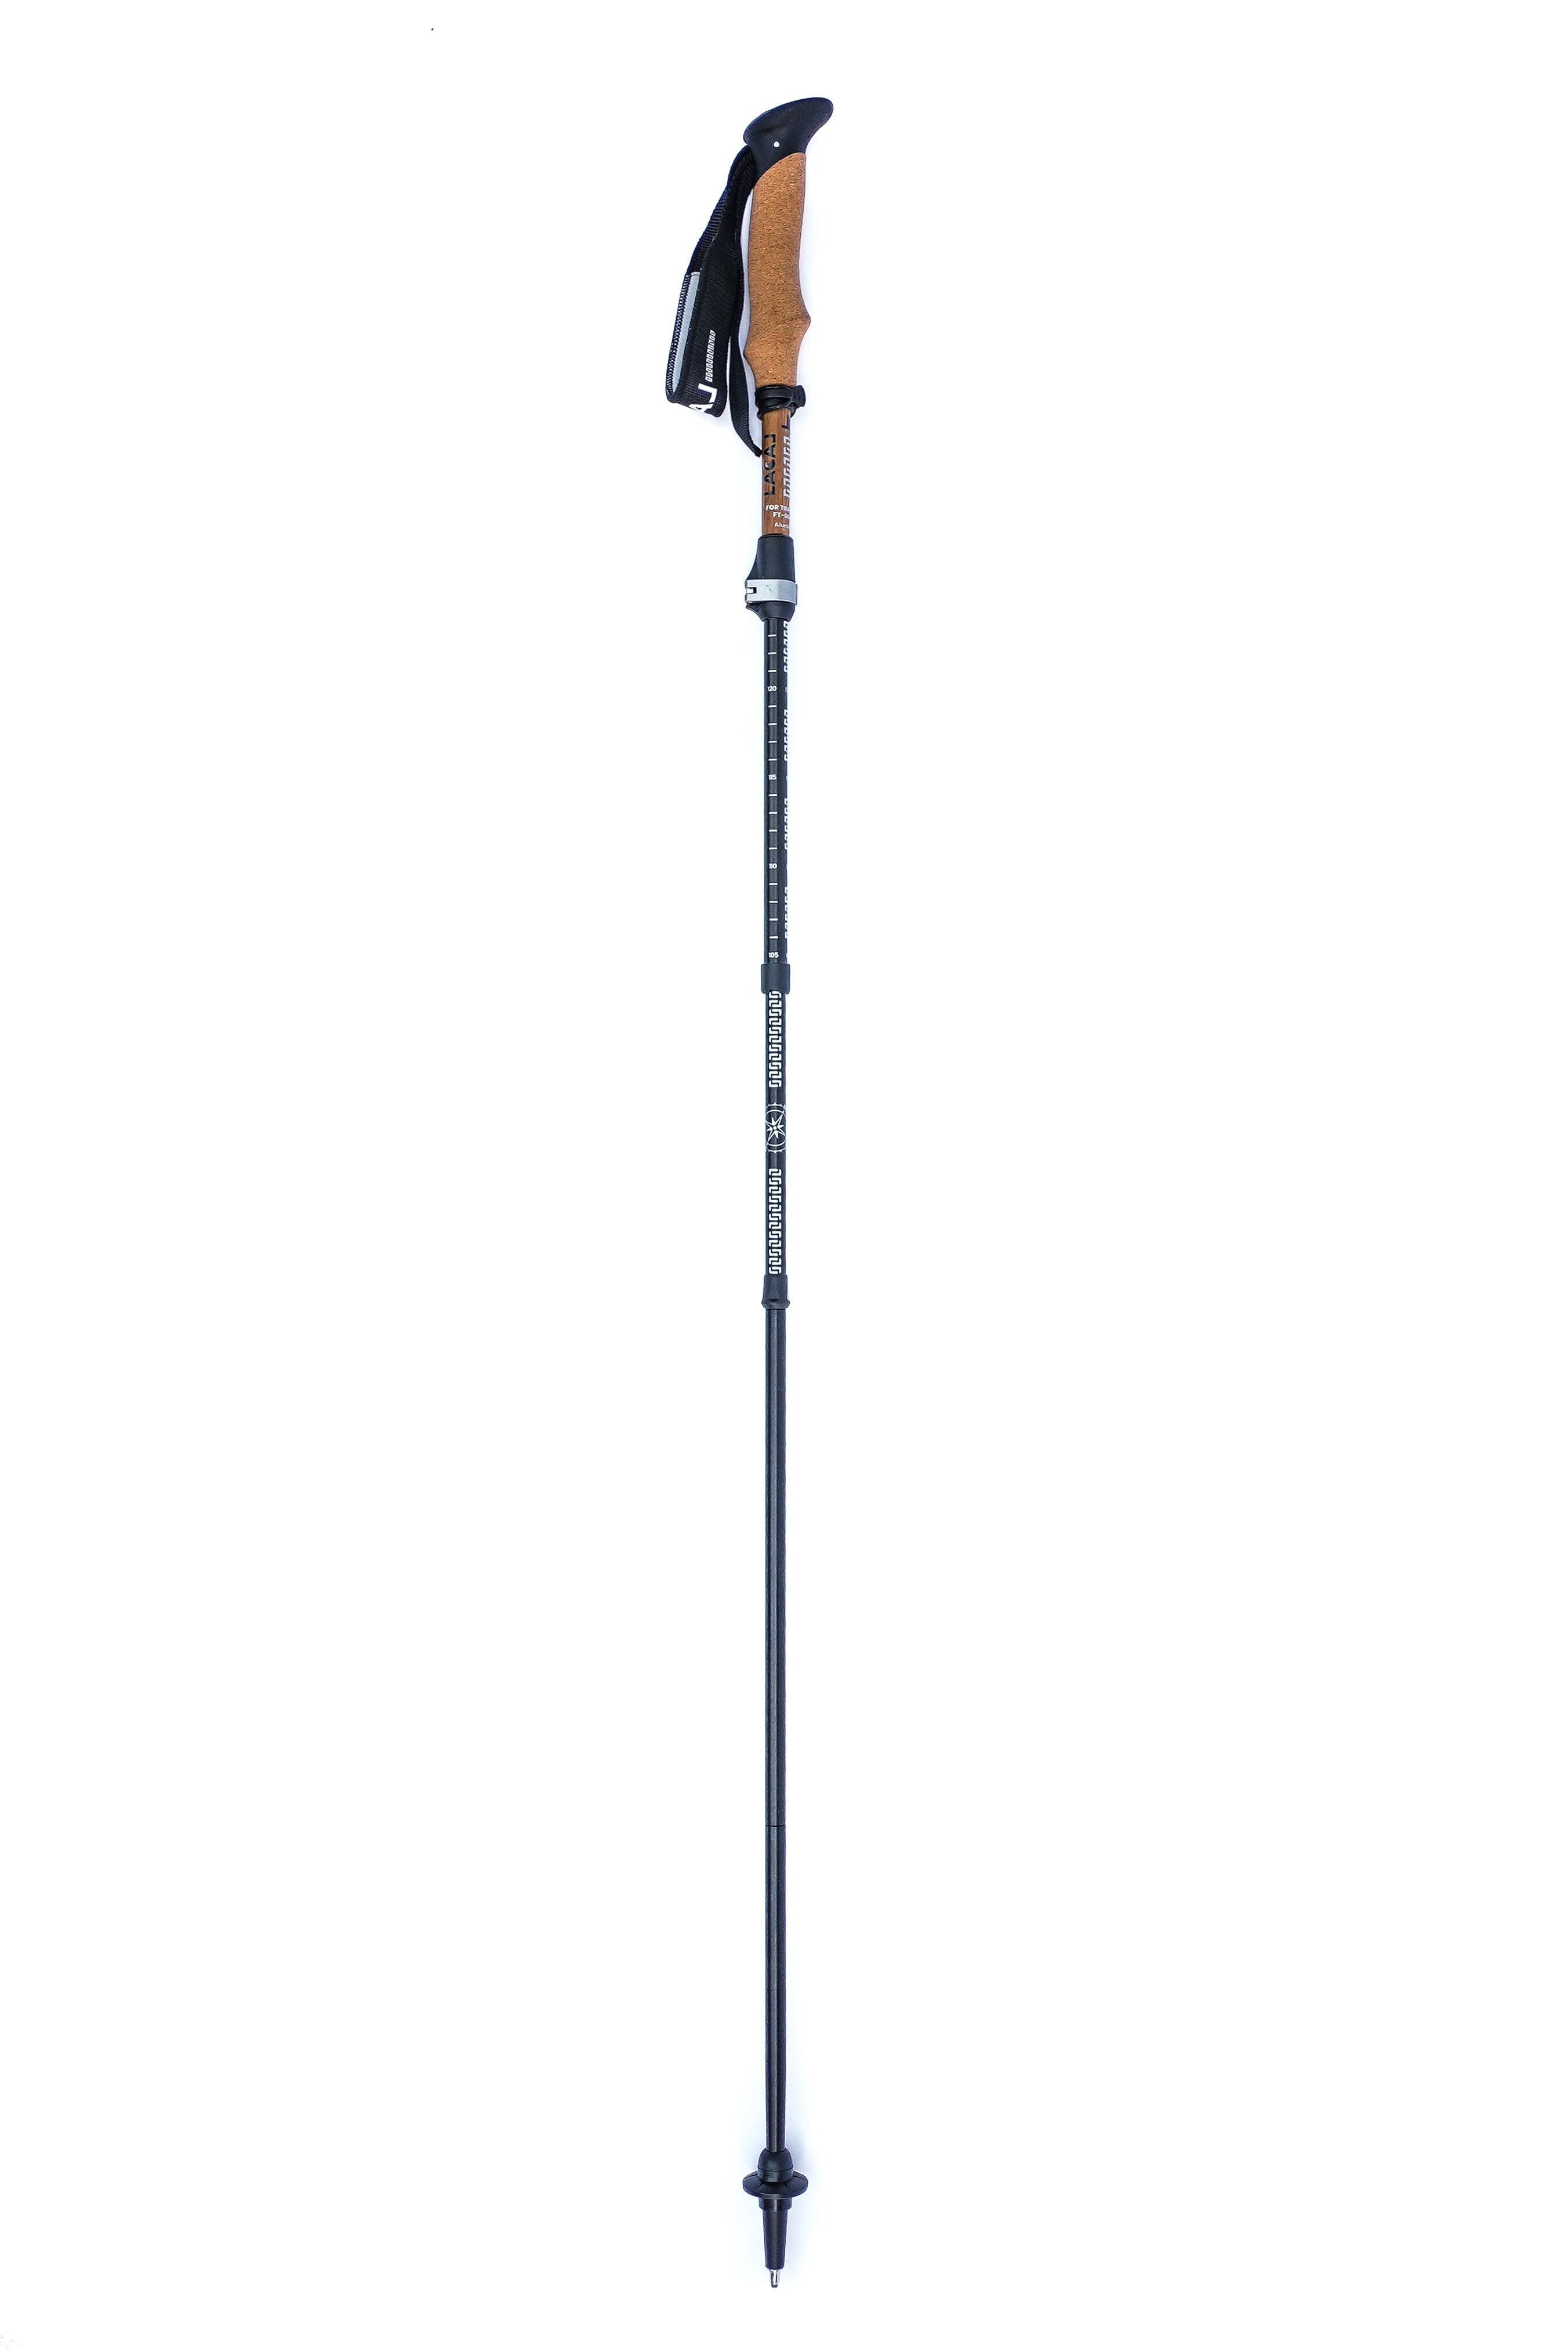 Lacal Travel stick compact - Walking poles